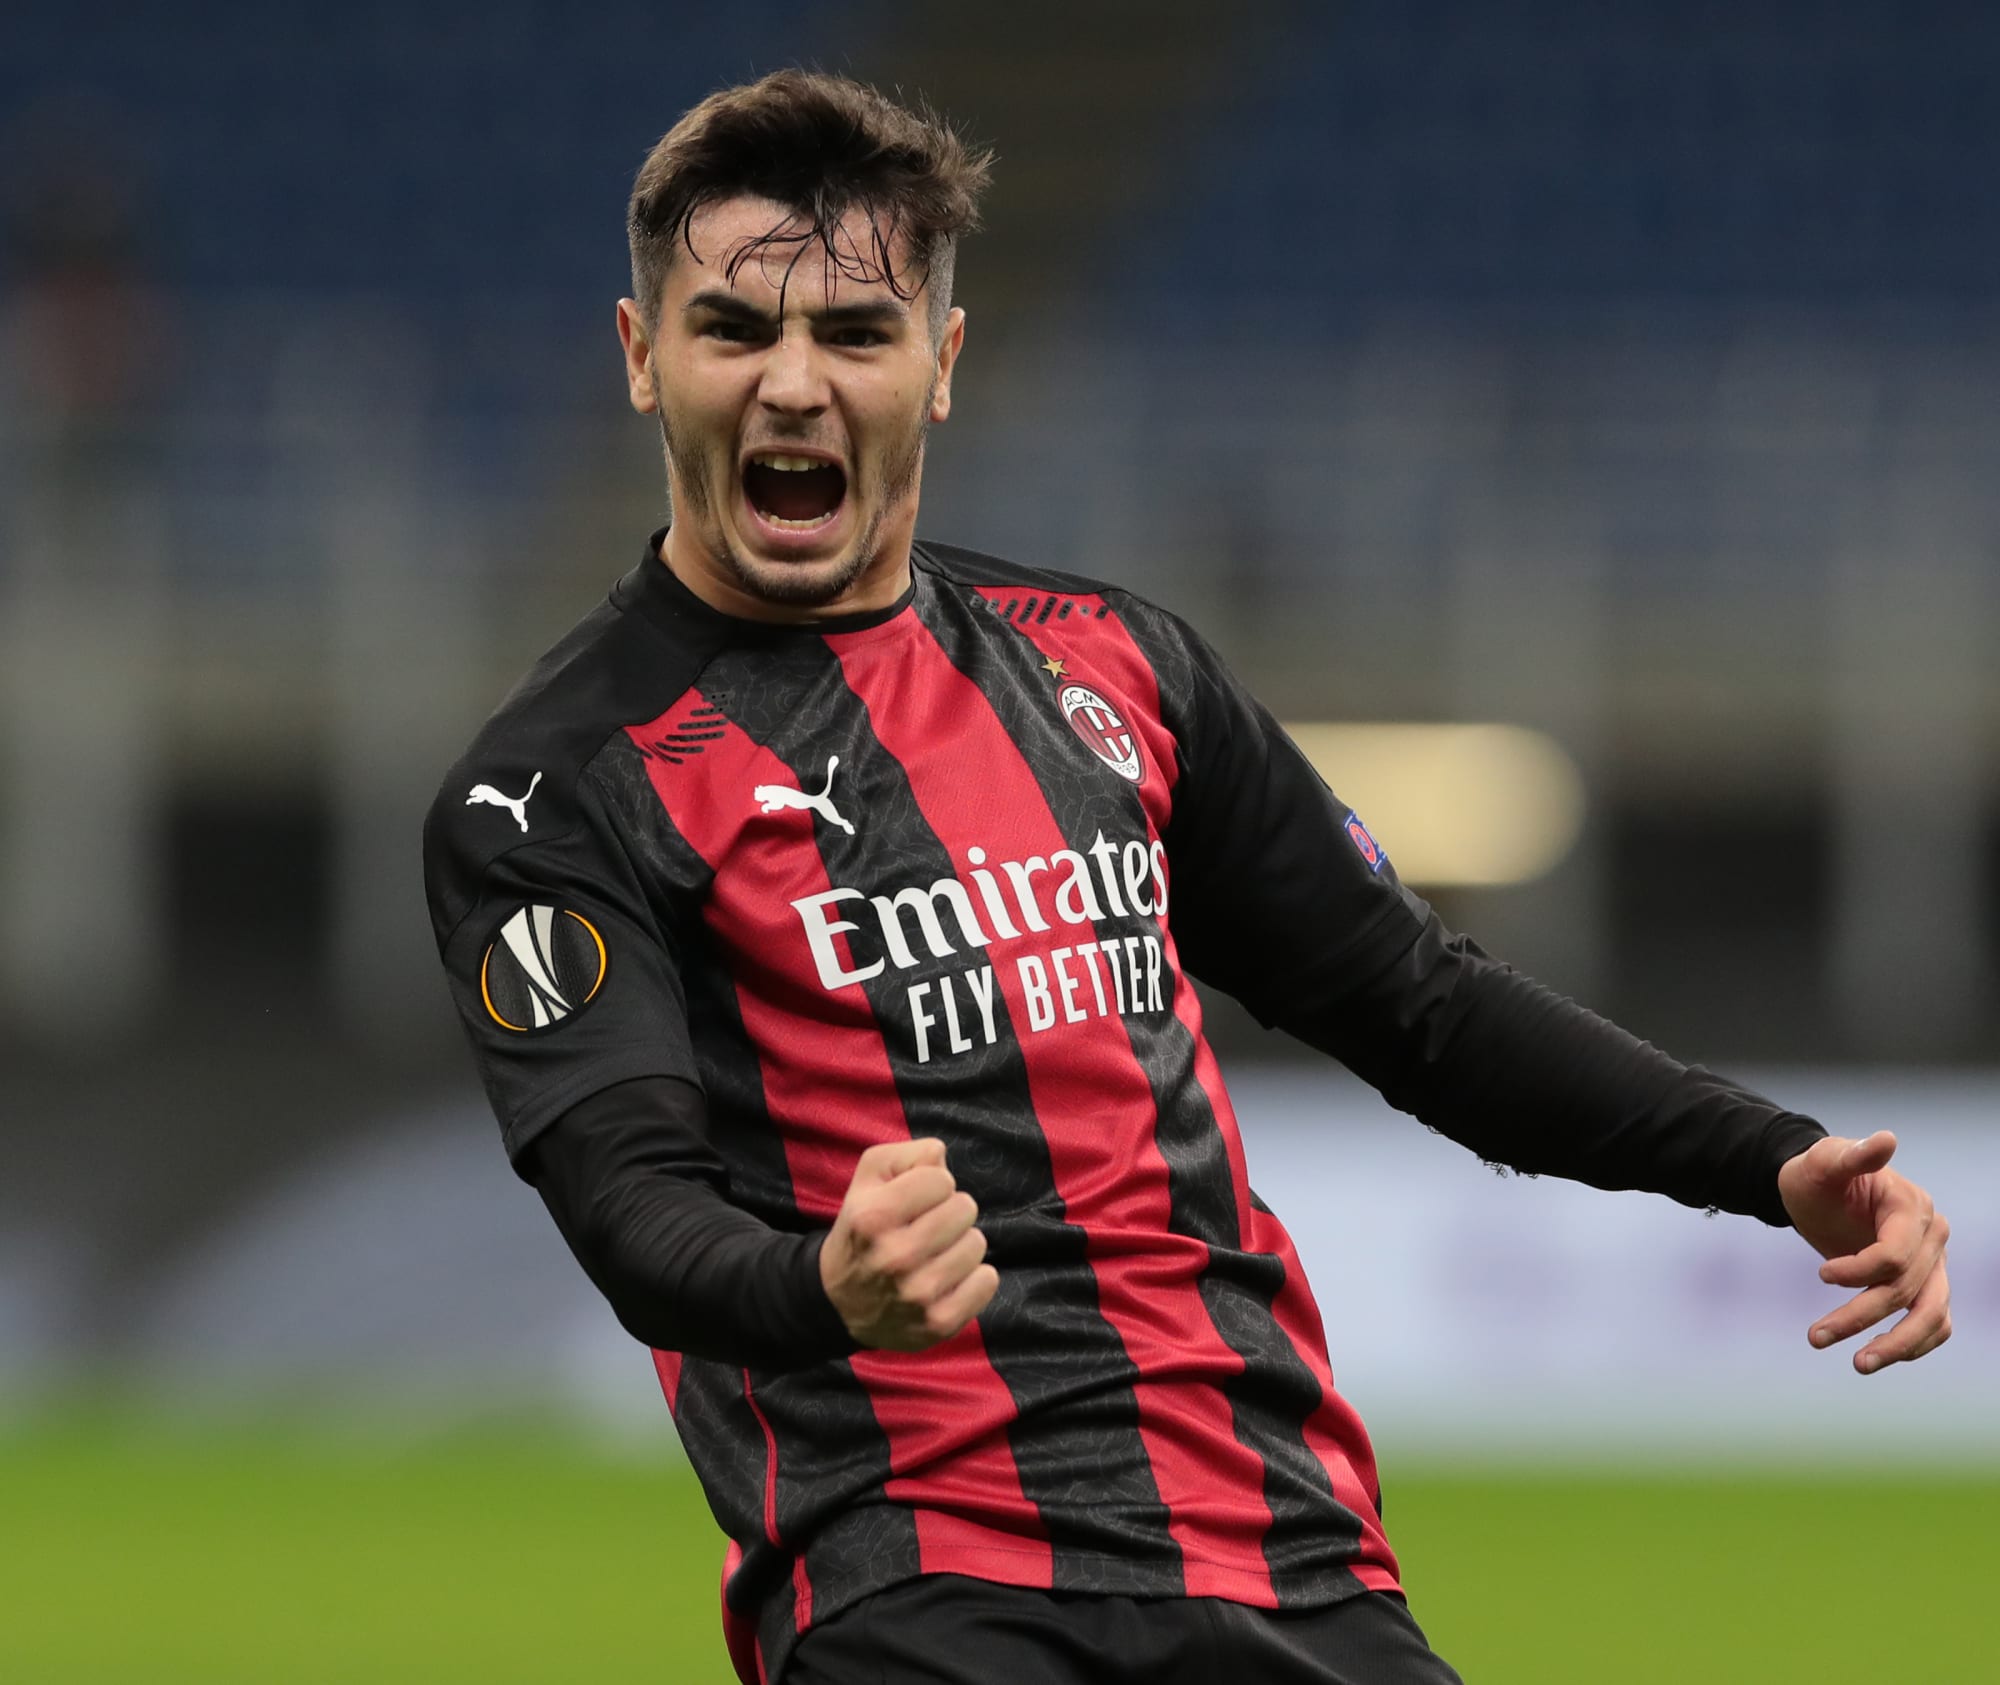 Real Madrid Brahim Diaz continues to dazzle with AC Milan